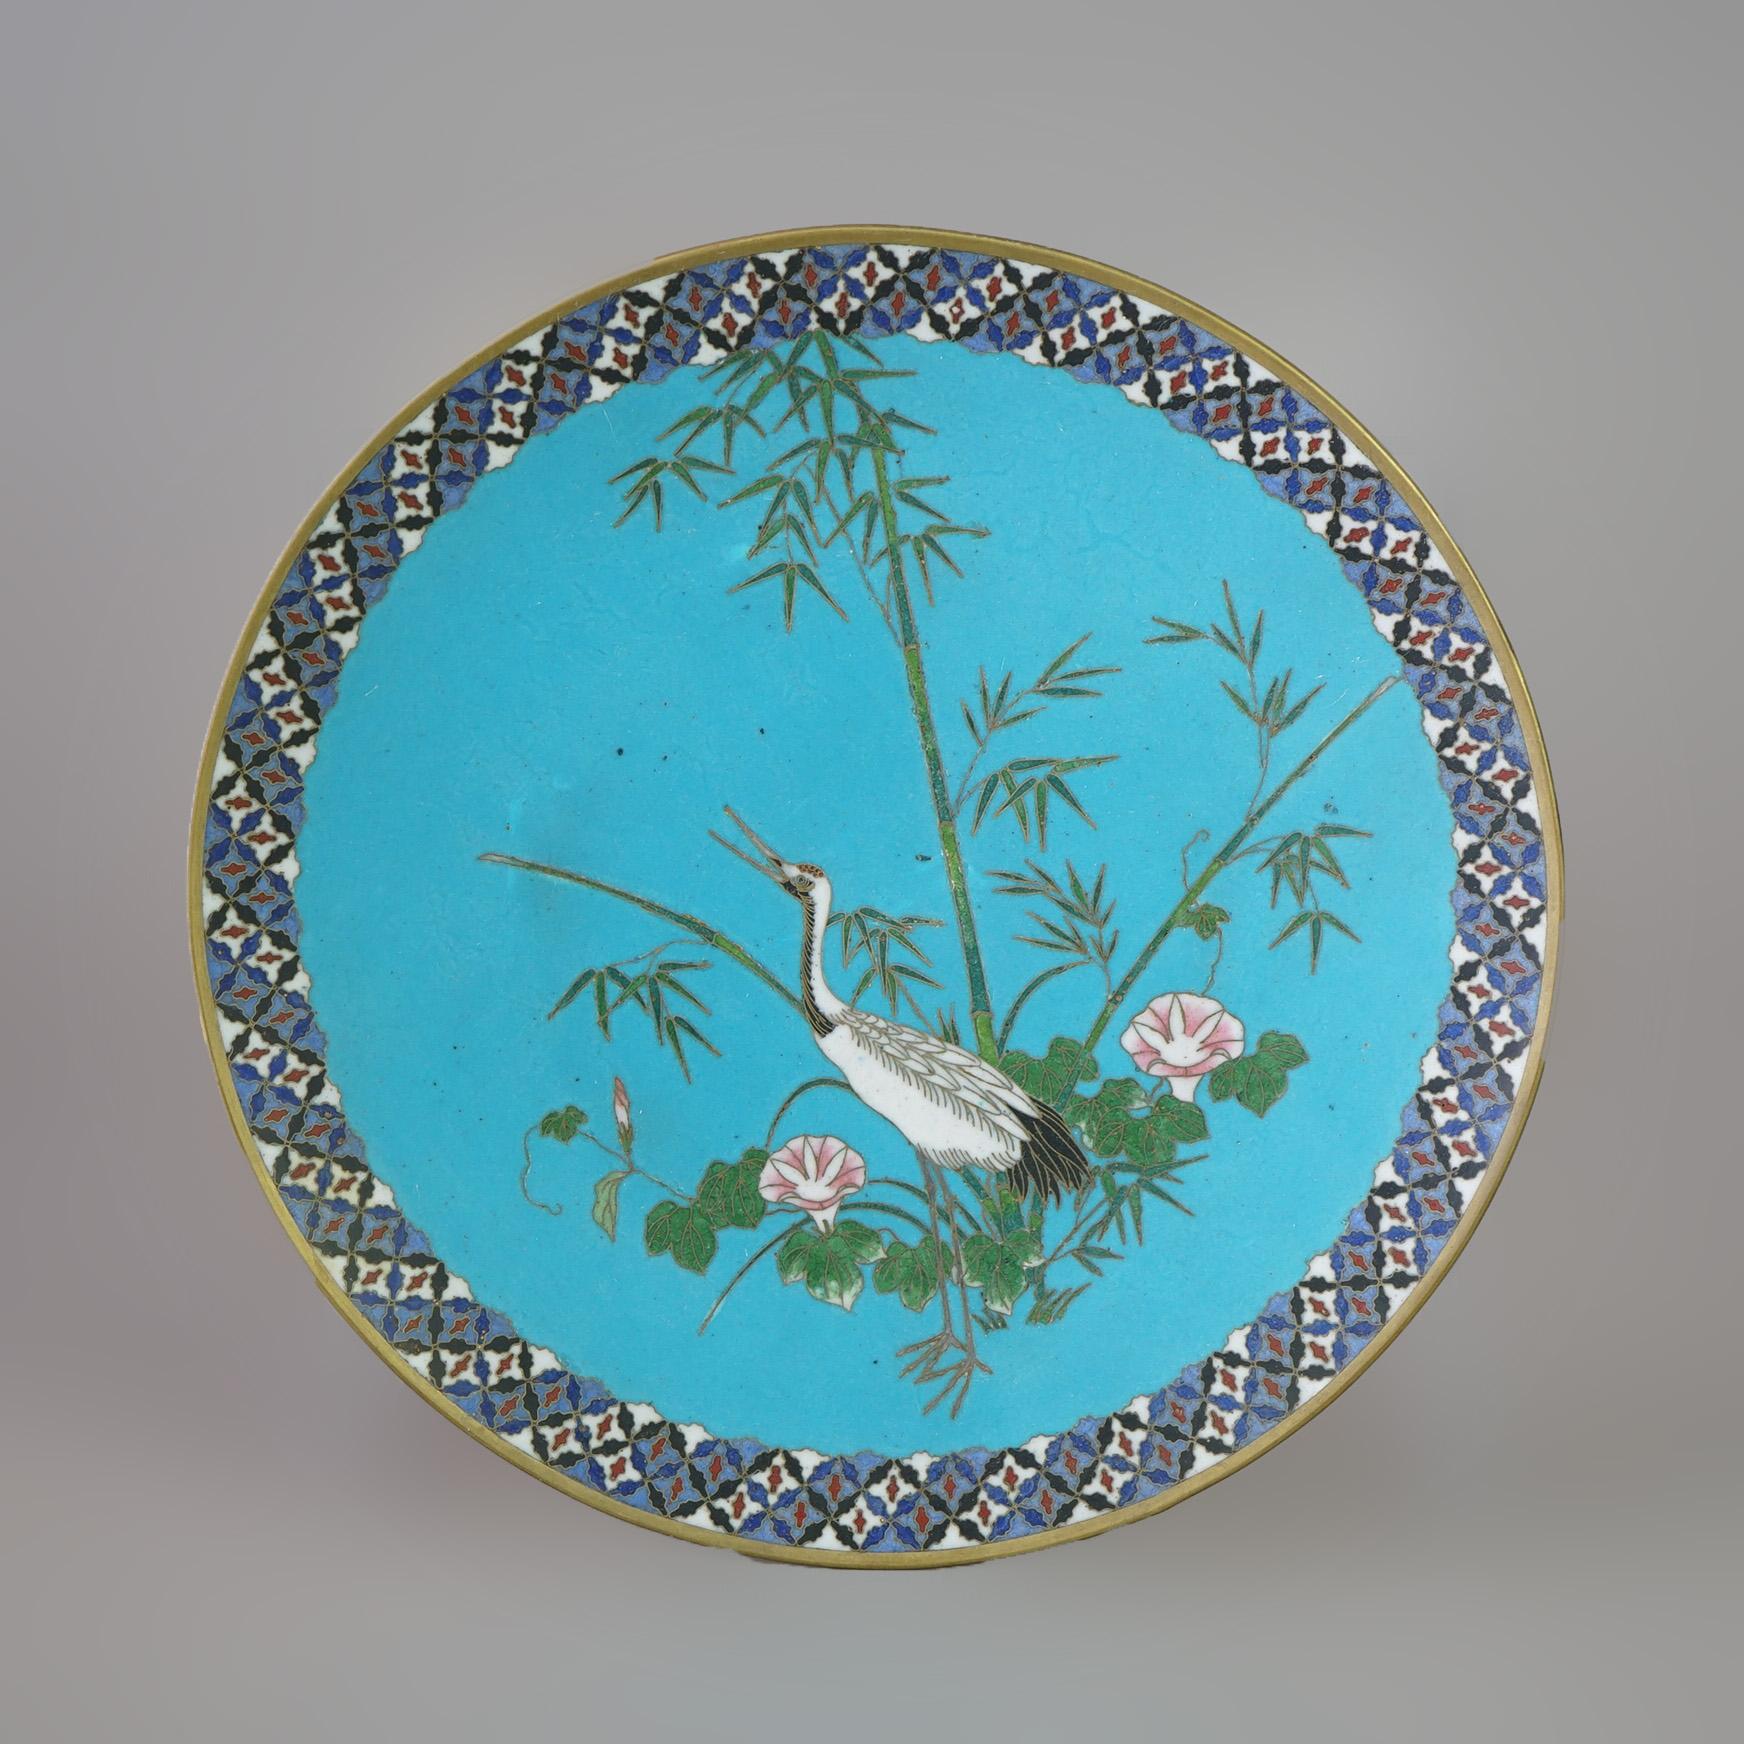 A Japanese Meiji figural charger offers cloisonne enameled metal construction with marsh scene and heron, 20th century

Measures - 1.25